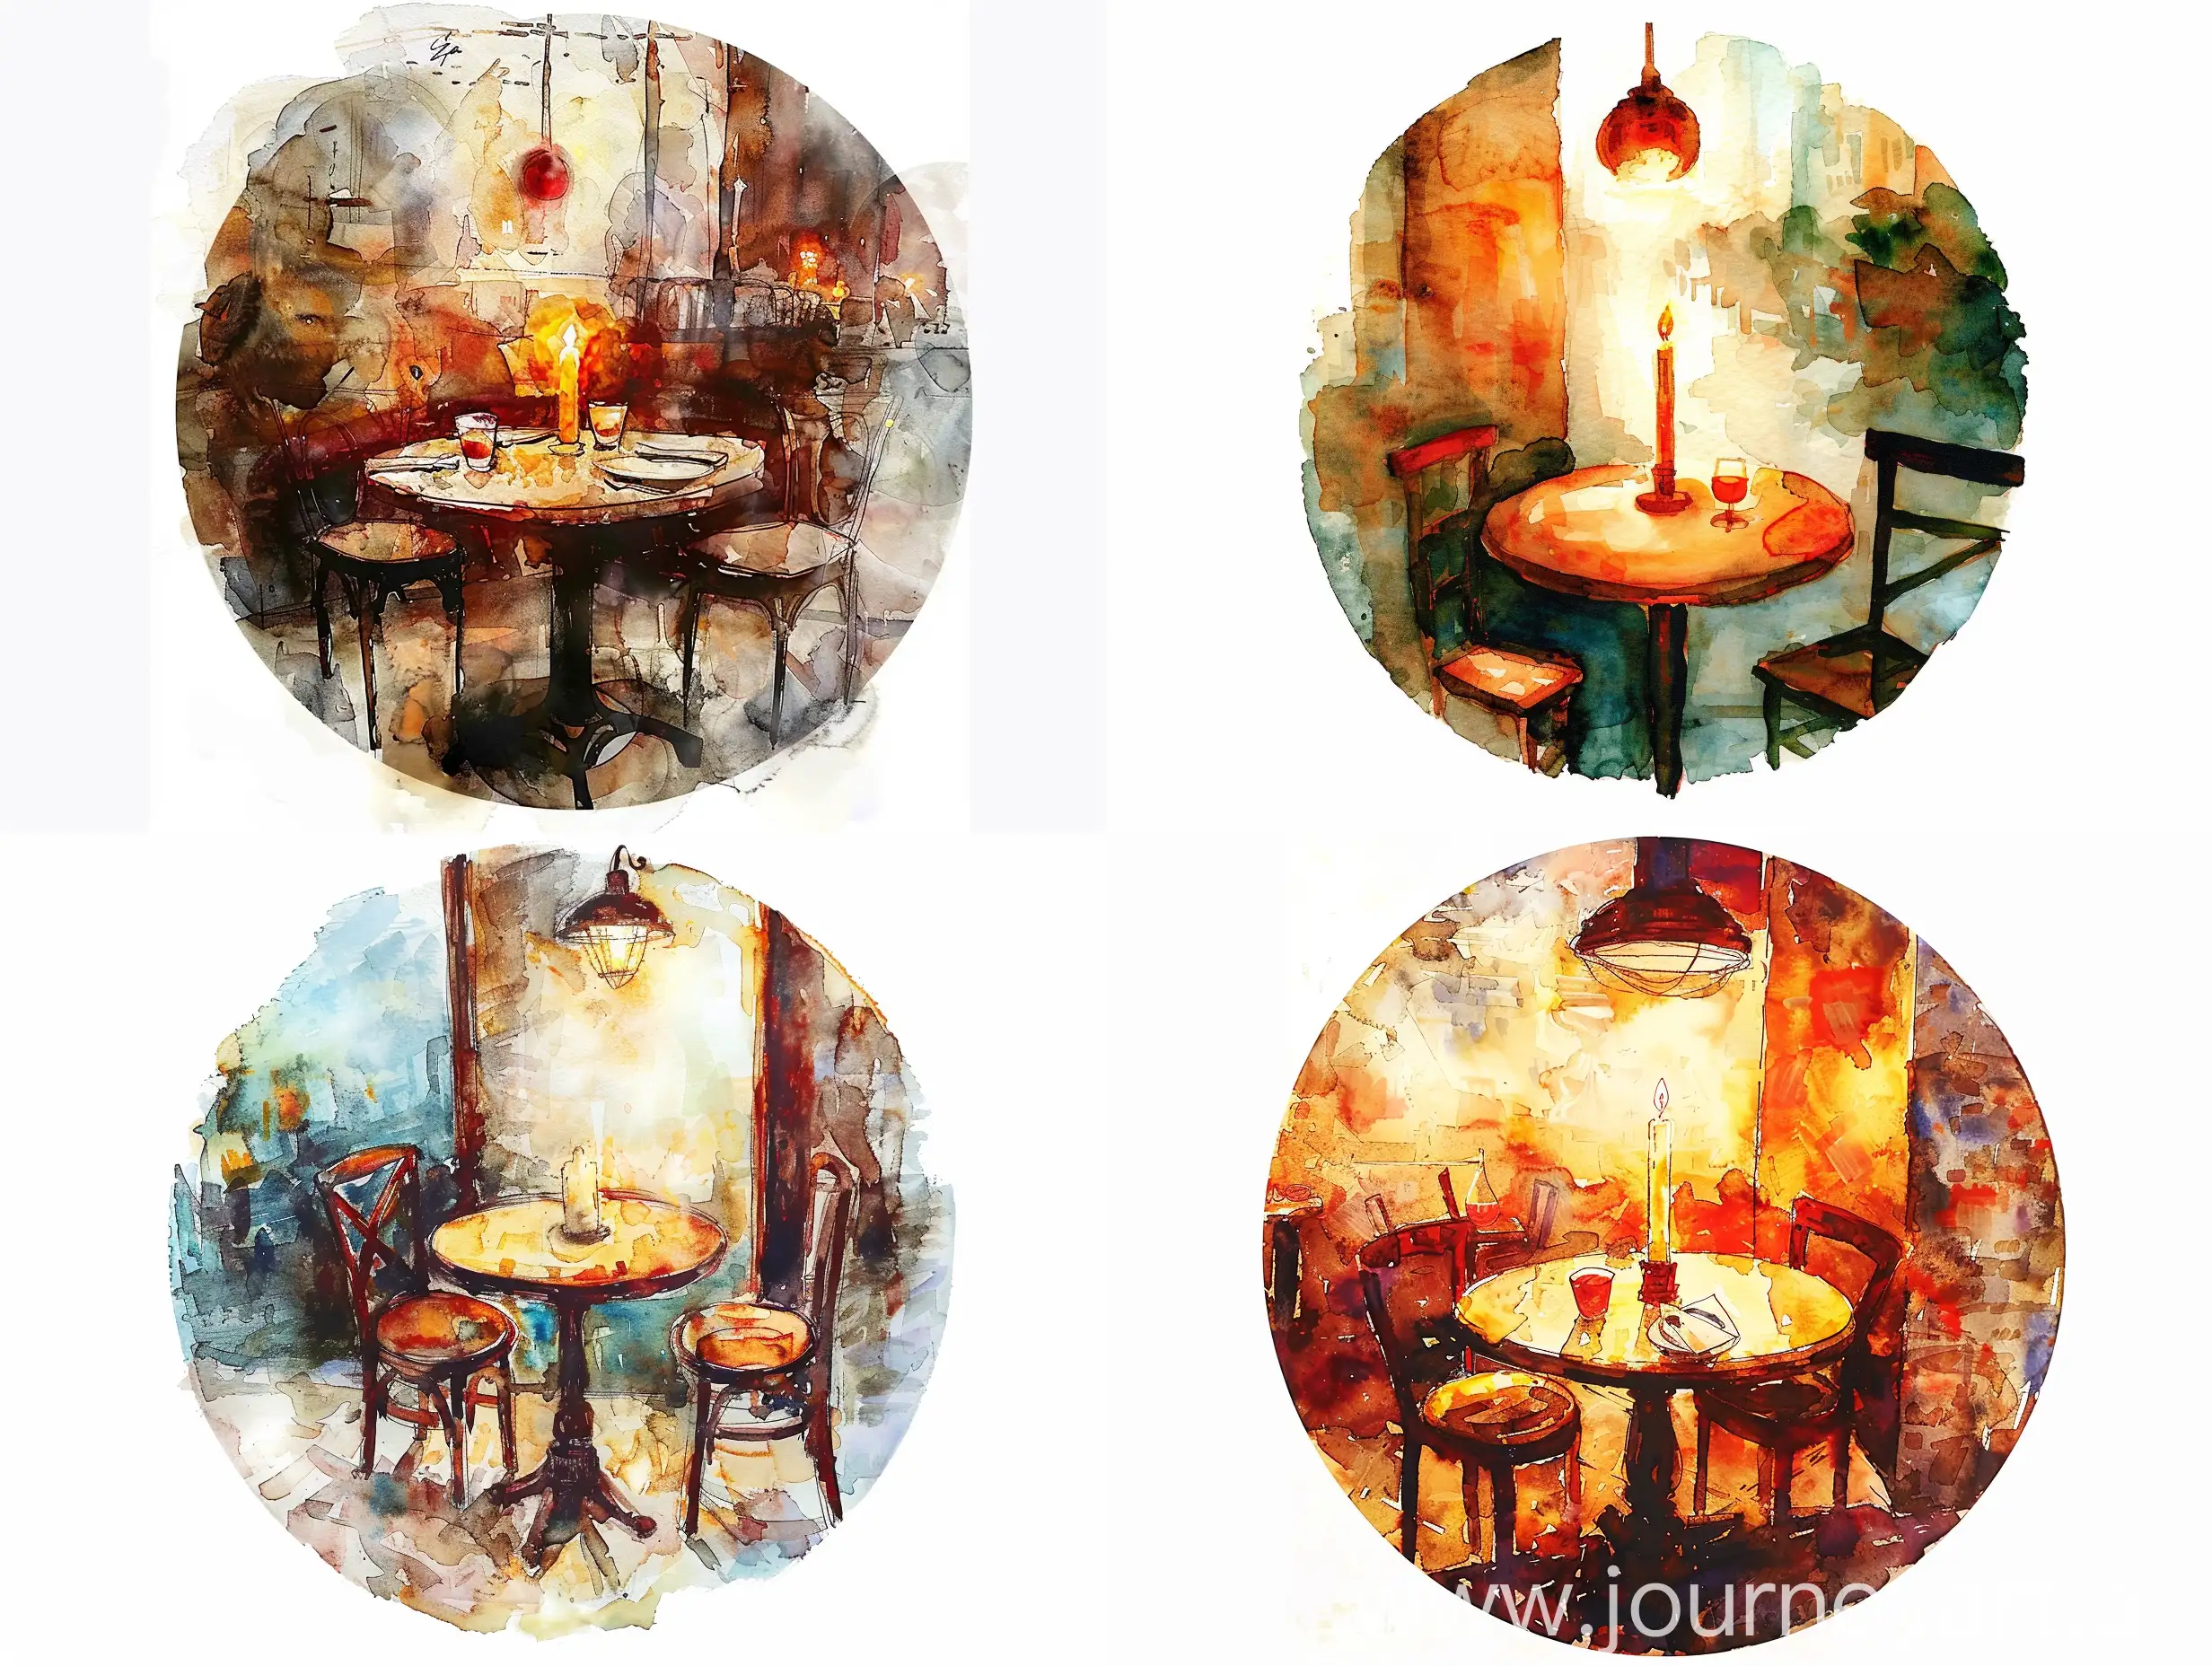 a candlelit table for two in a quit corner of a busting restaurant, rromantic, mixed wet-to-wet technique of alcohol ink and watercolor, all in round shape, isolated on white background